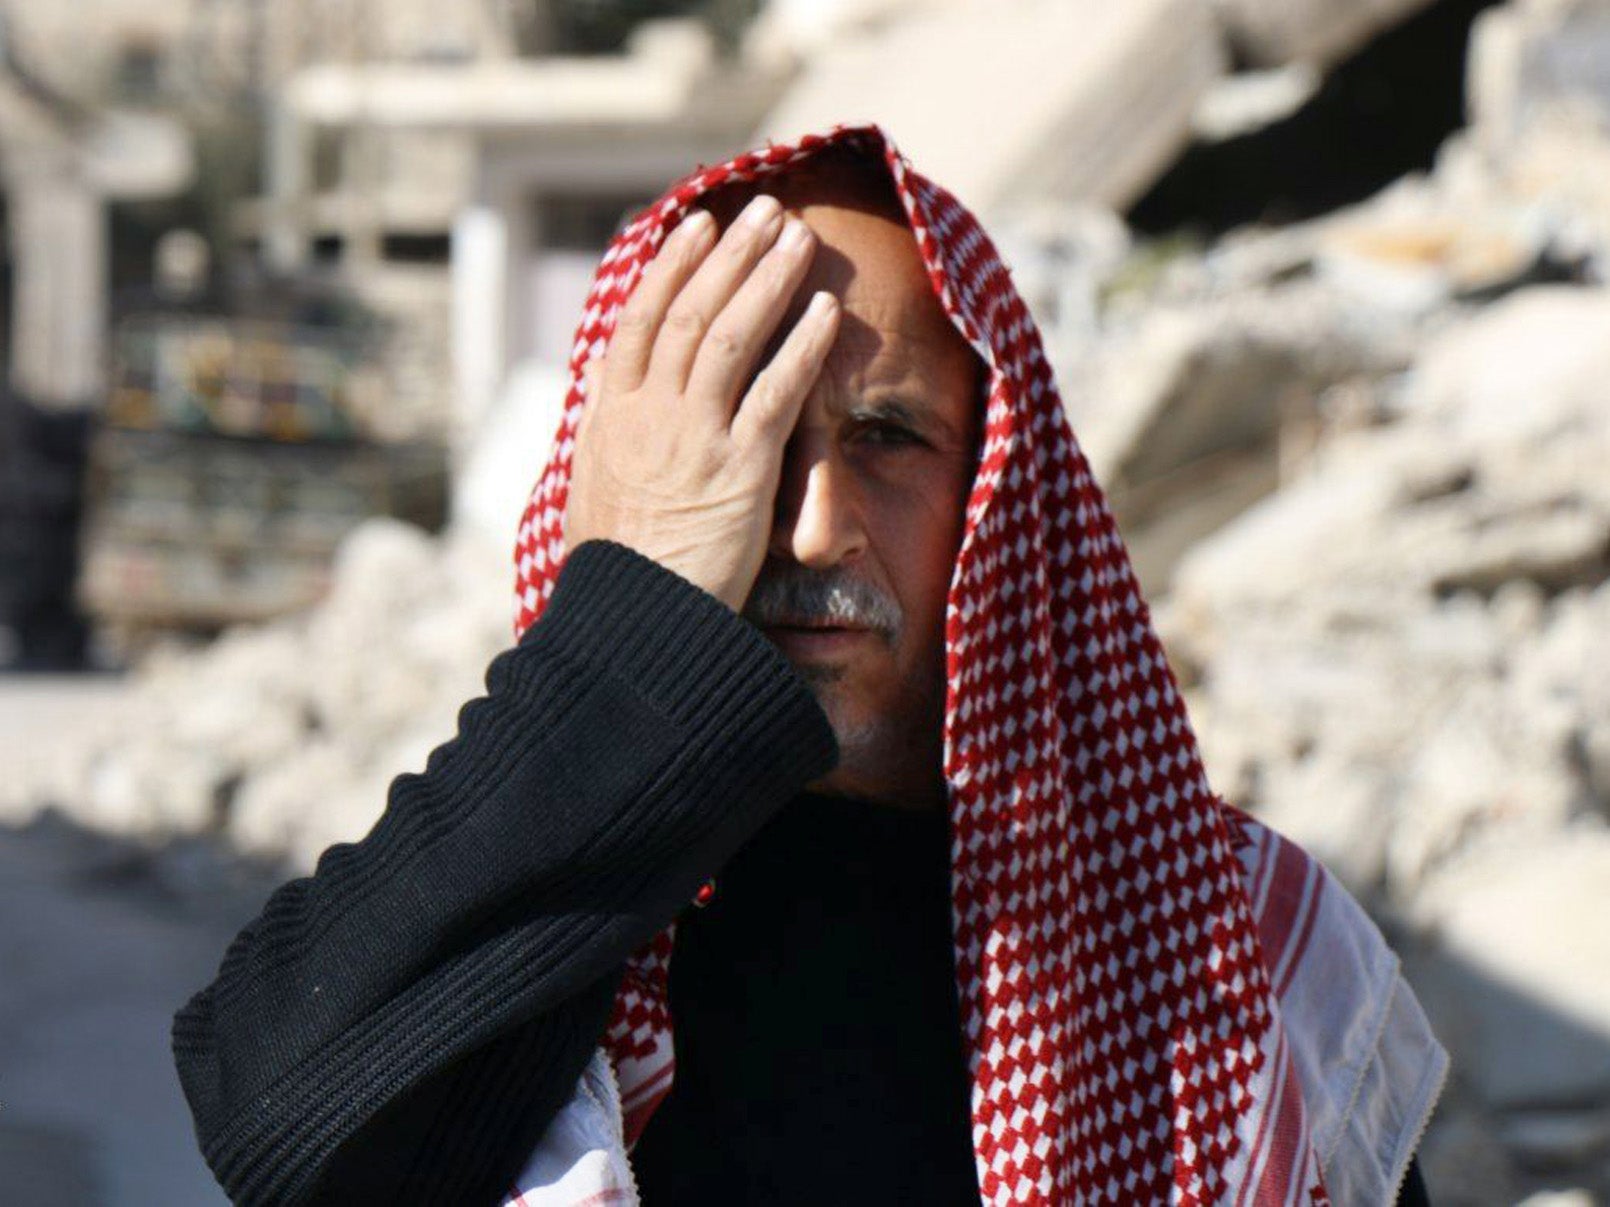 &#13;
A man in eastern Ghouta covers his right eye in solidarity with Karim (AP/Ghouta Media Centre)&#13;